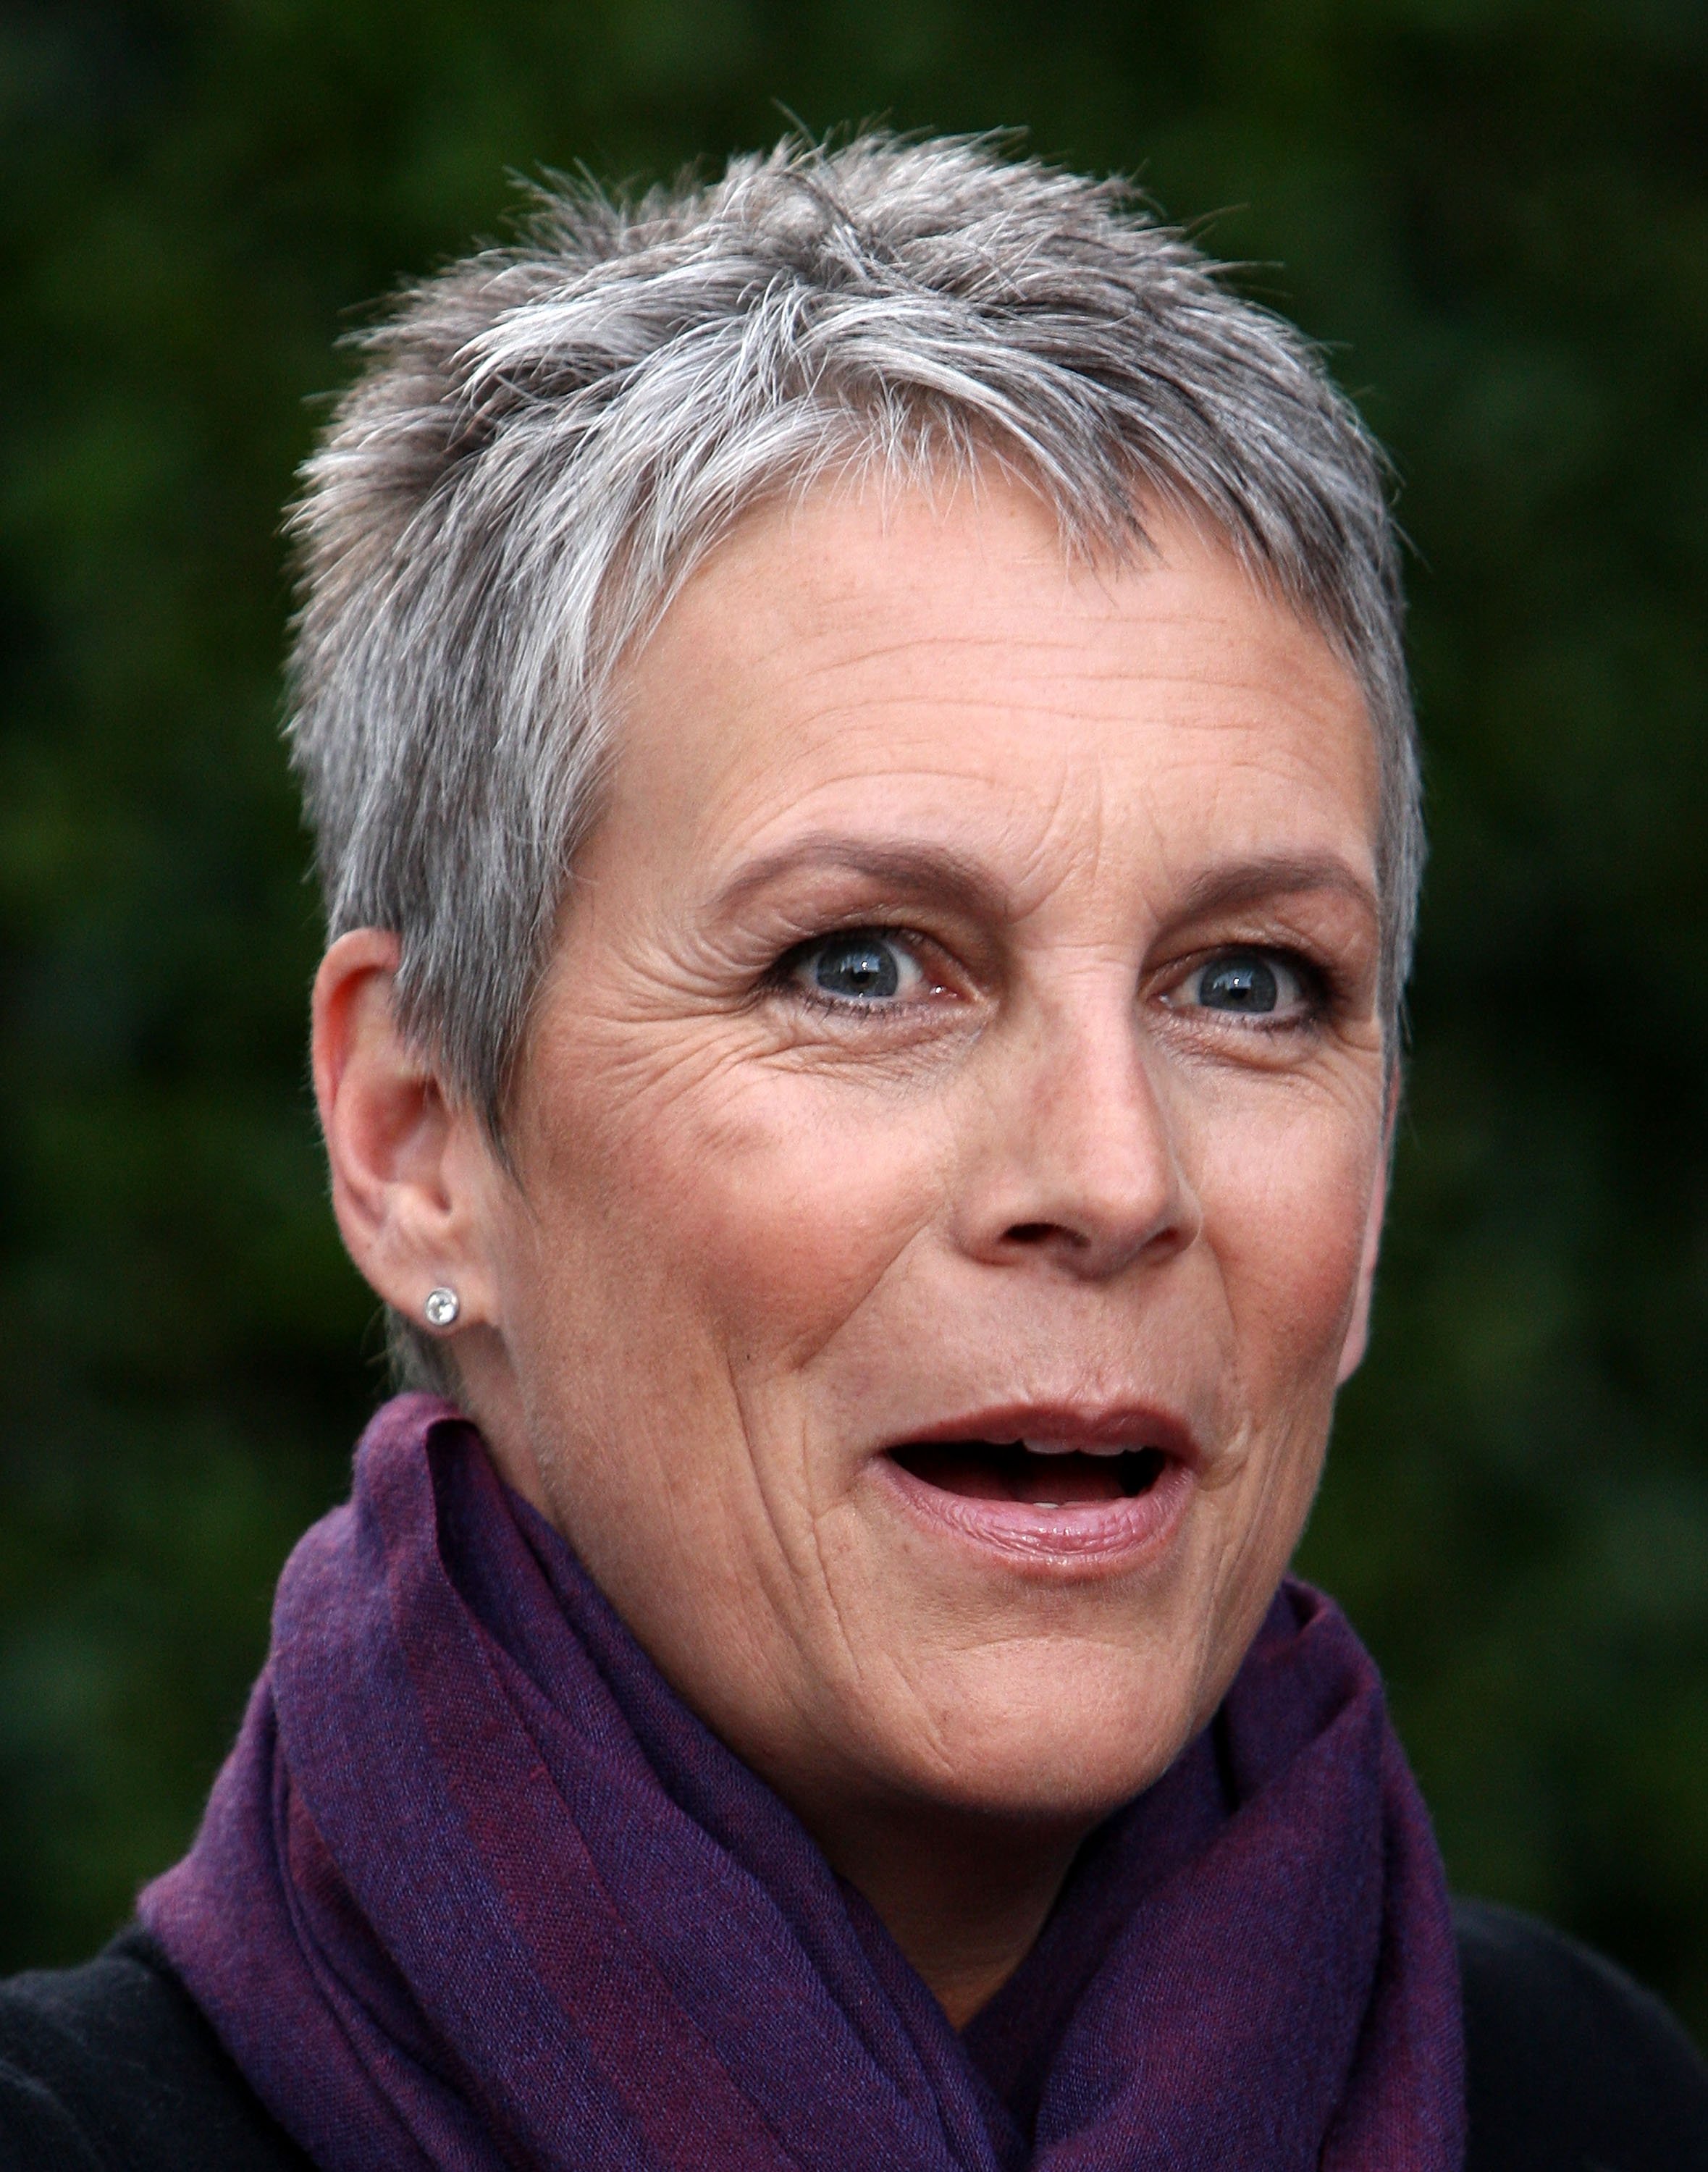 Jamie Lee Curtis at the Annenberg Foundation's Opening Night Gala on March 26, 2009, in Los Angeles, California. | Source: Getty Images